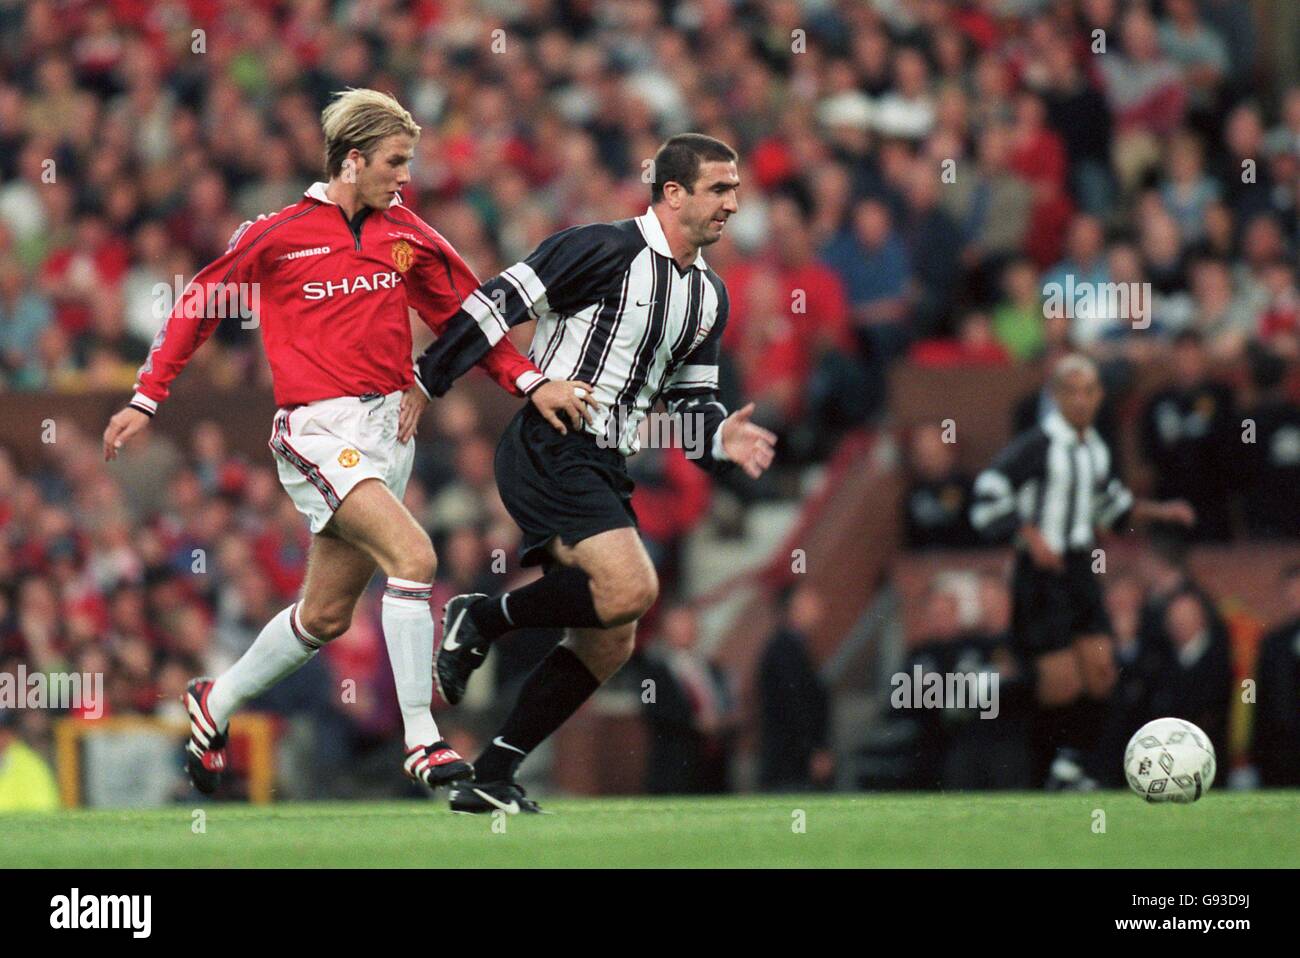 Manchester United's David Beckham (left) battles for the ball with Cantona XI's Eric Cantona (right) Stock Photo